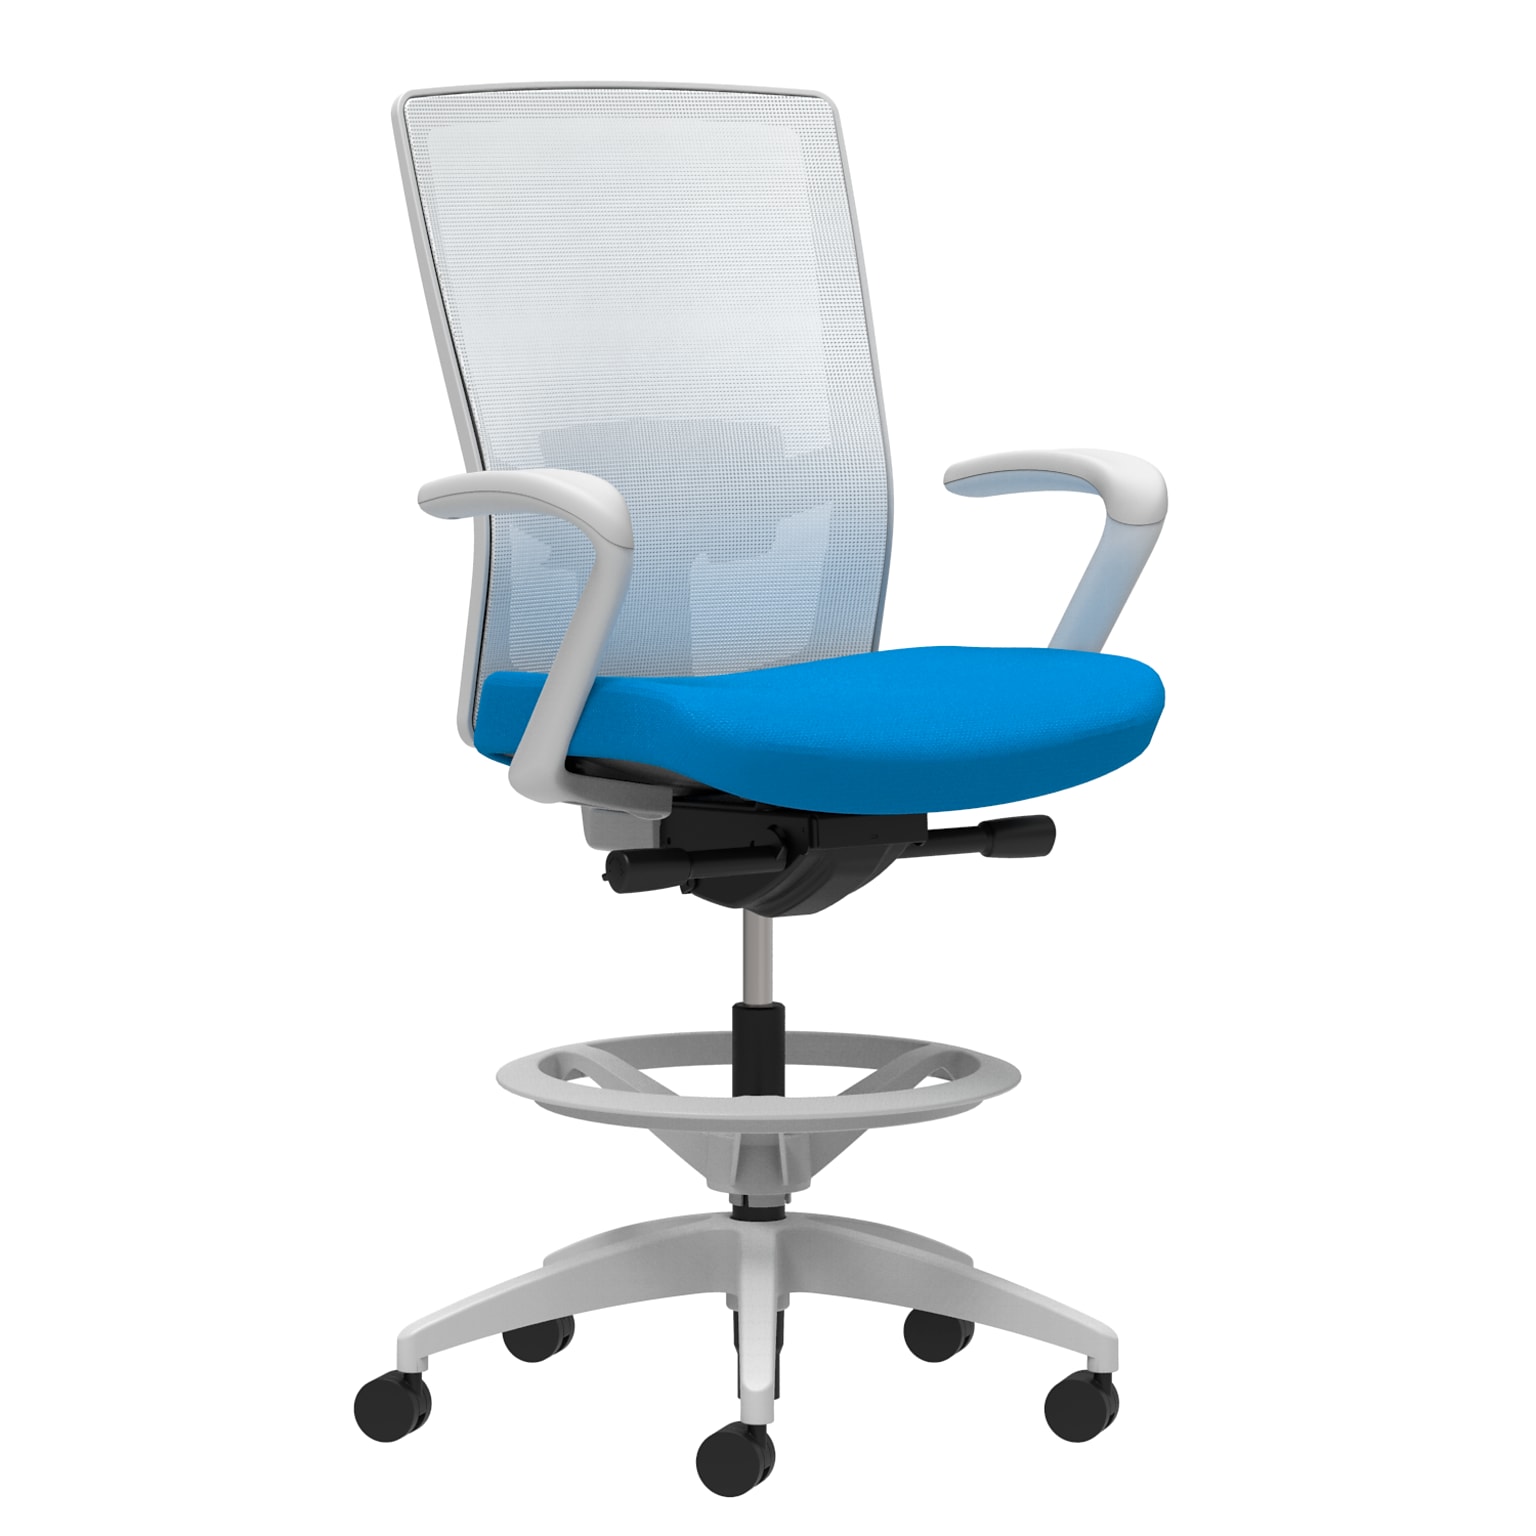 Union & Scale Workplace2.0™ Fabric Stool, Cobalt, Adjustable Lumbar, Fixed Arms, Synchro-Tilt Seat Control (53790)